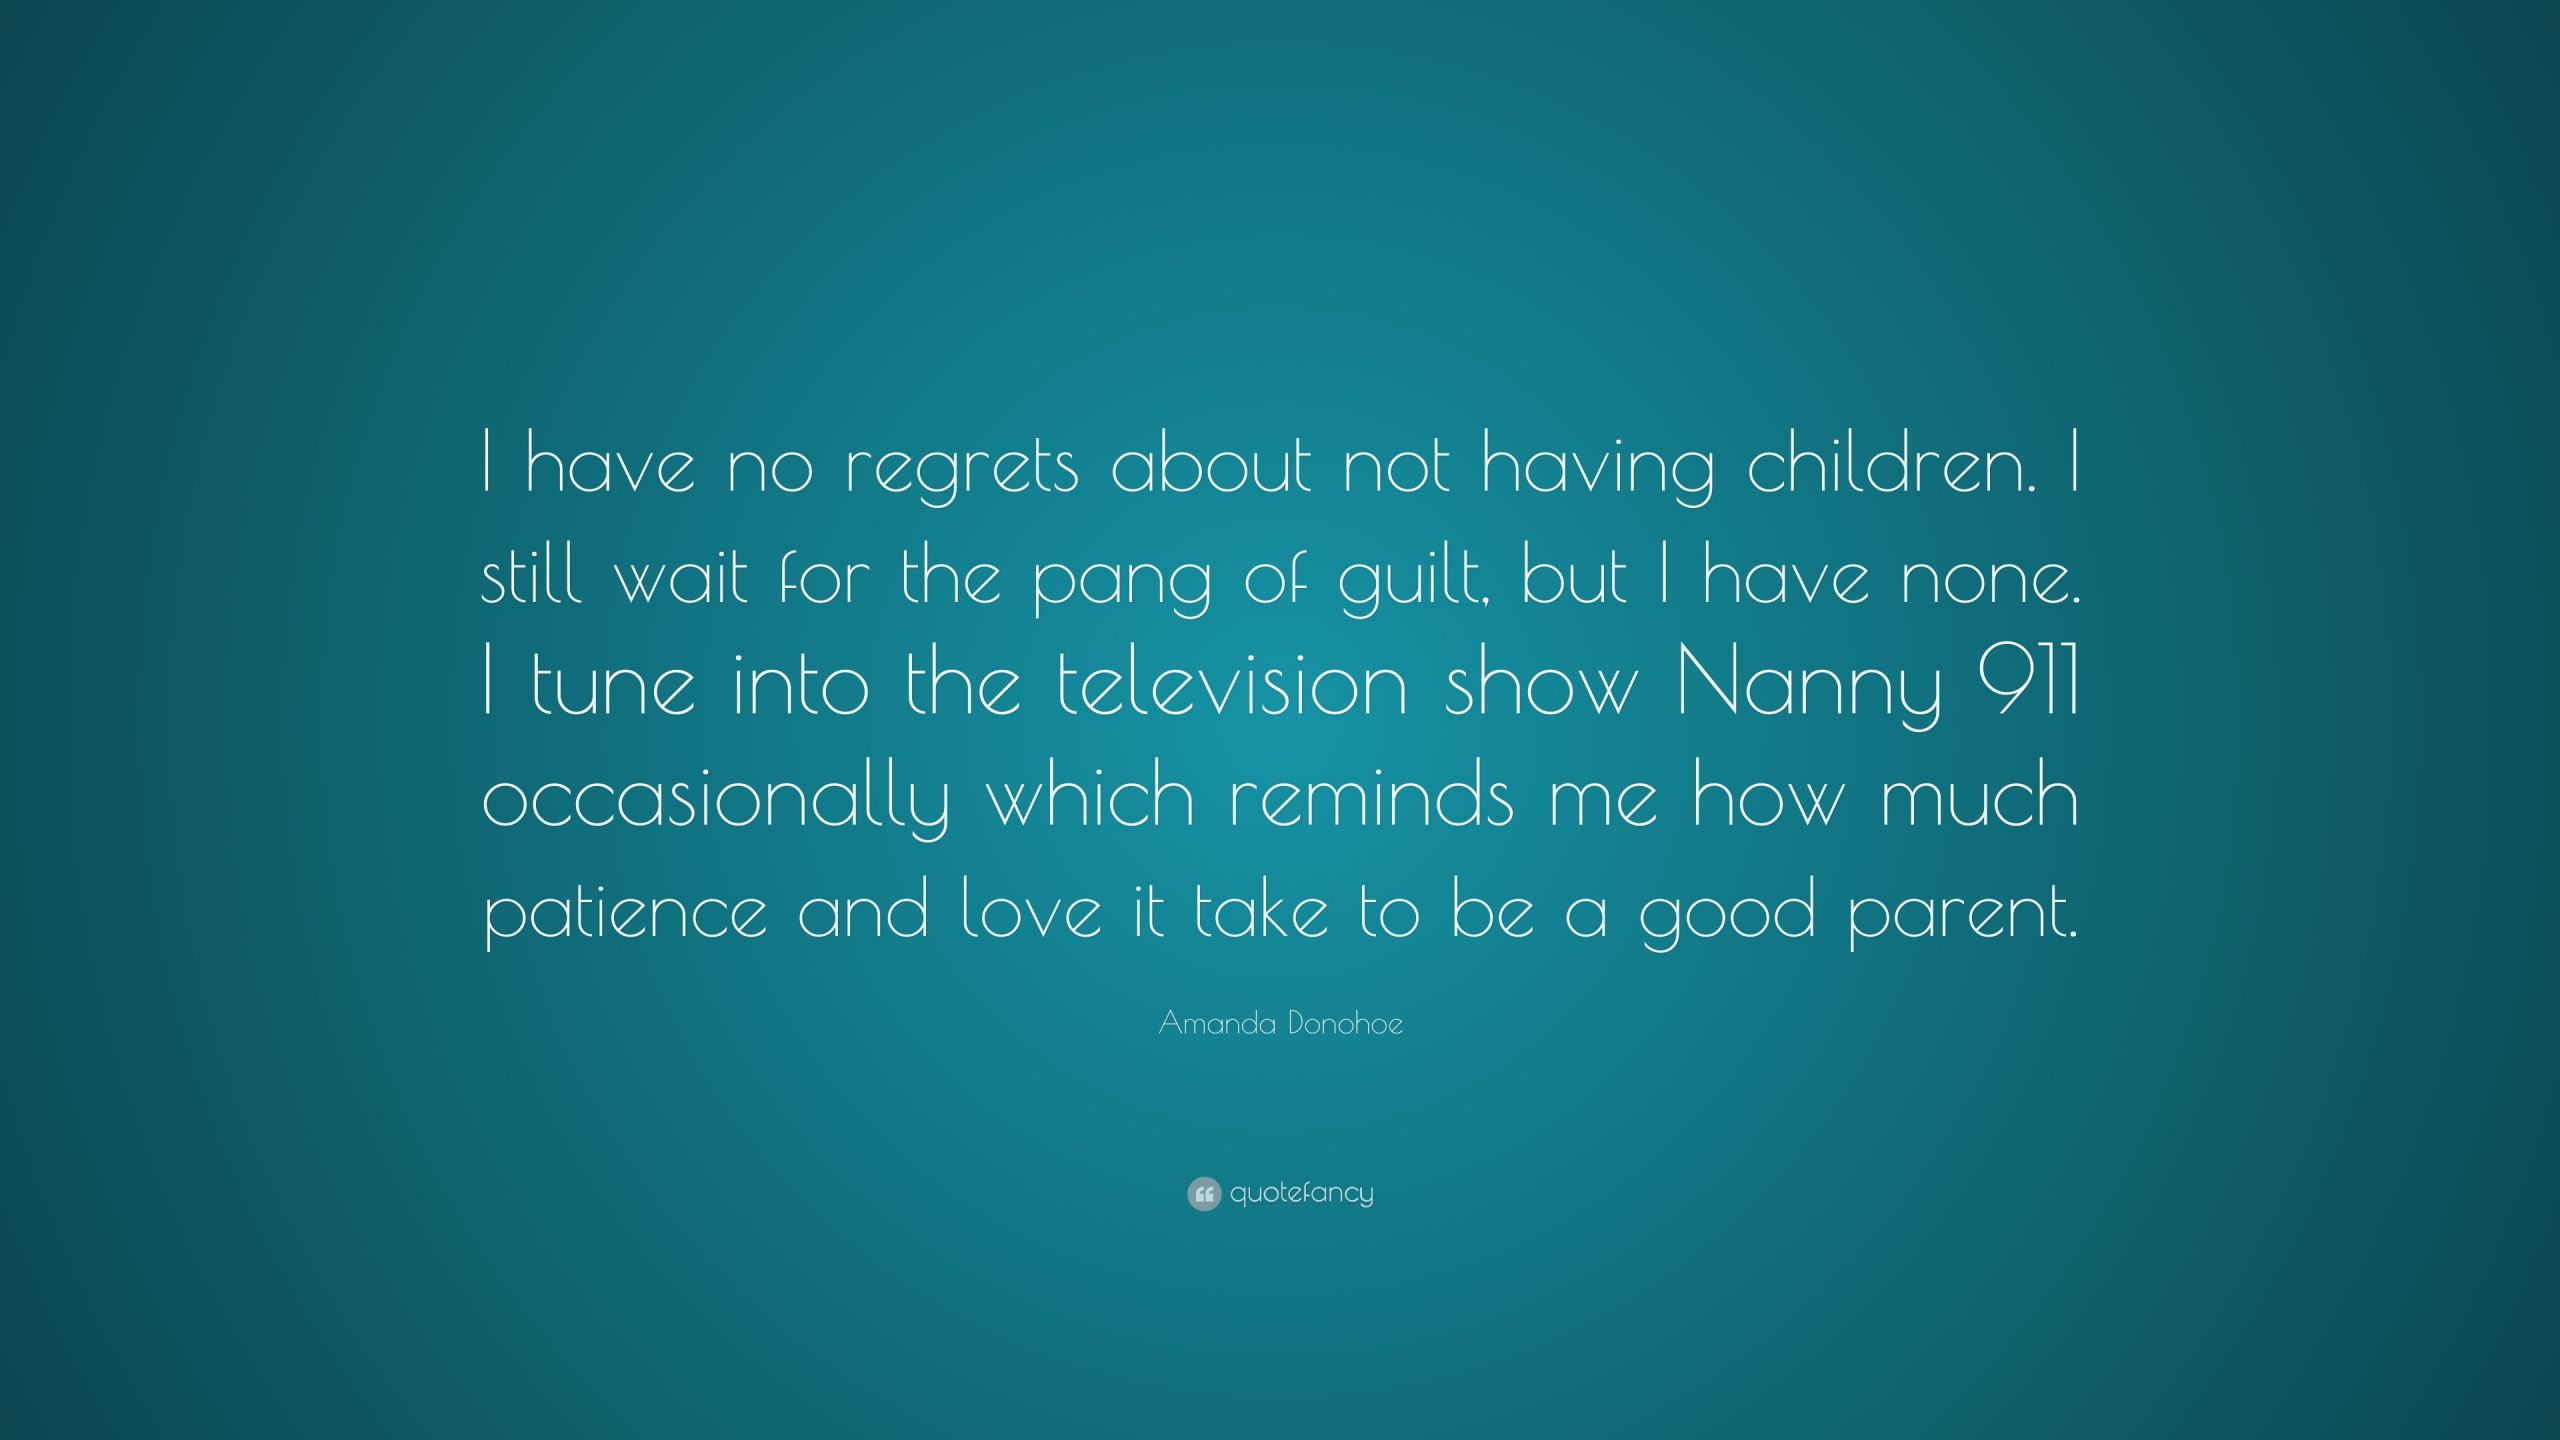 Quotes About Not Having Kids
 Amanda Donohoe Quote “I have no regrets about not having